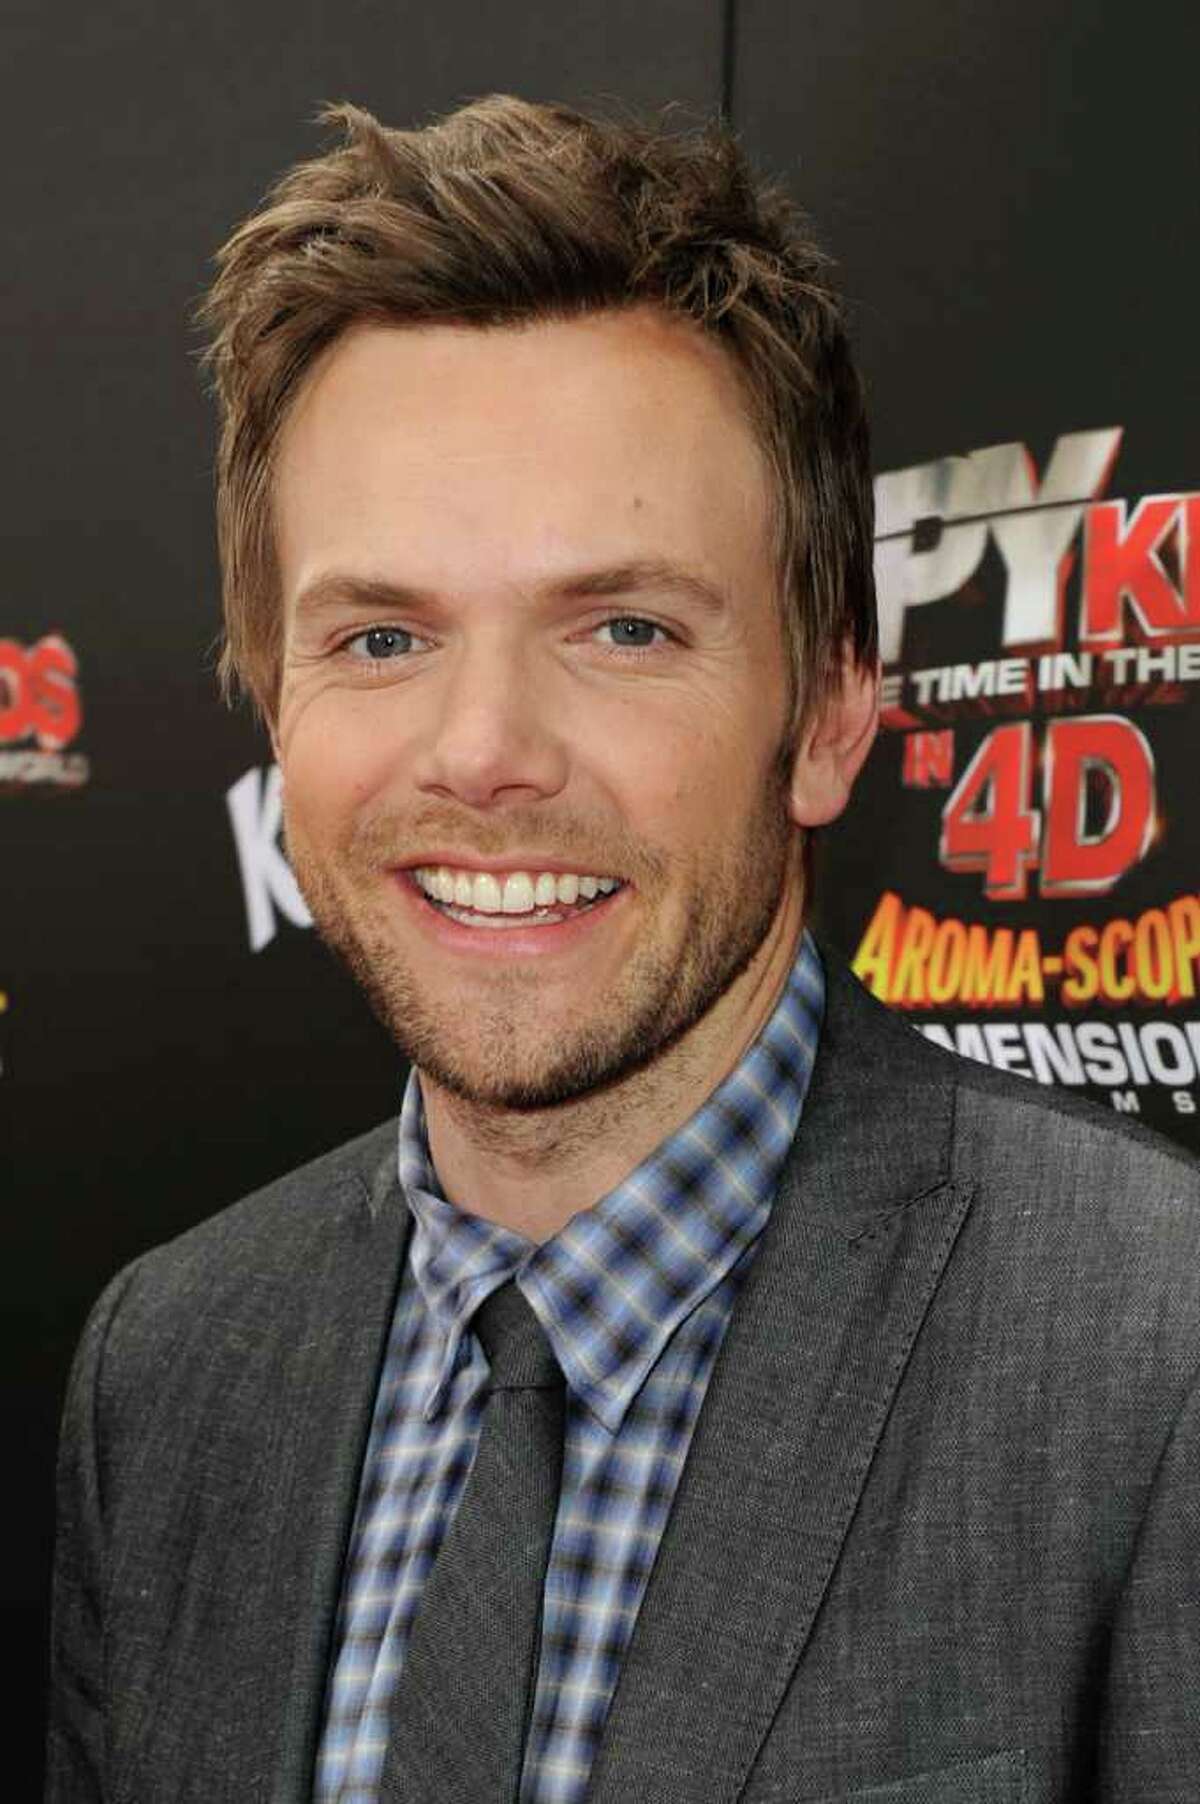 Although "The Soup" host Joel McHale was actually born in Italy, he grew up in Seattle. McHale attended Mercer Island High School and went on to graduate from the University of Washington.